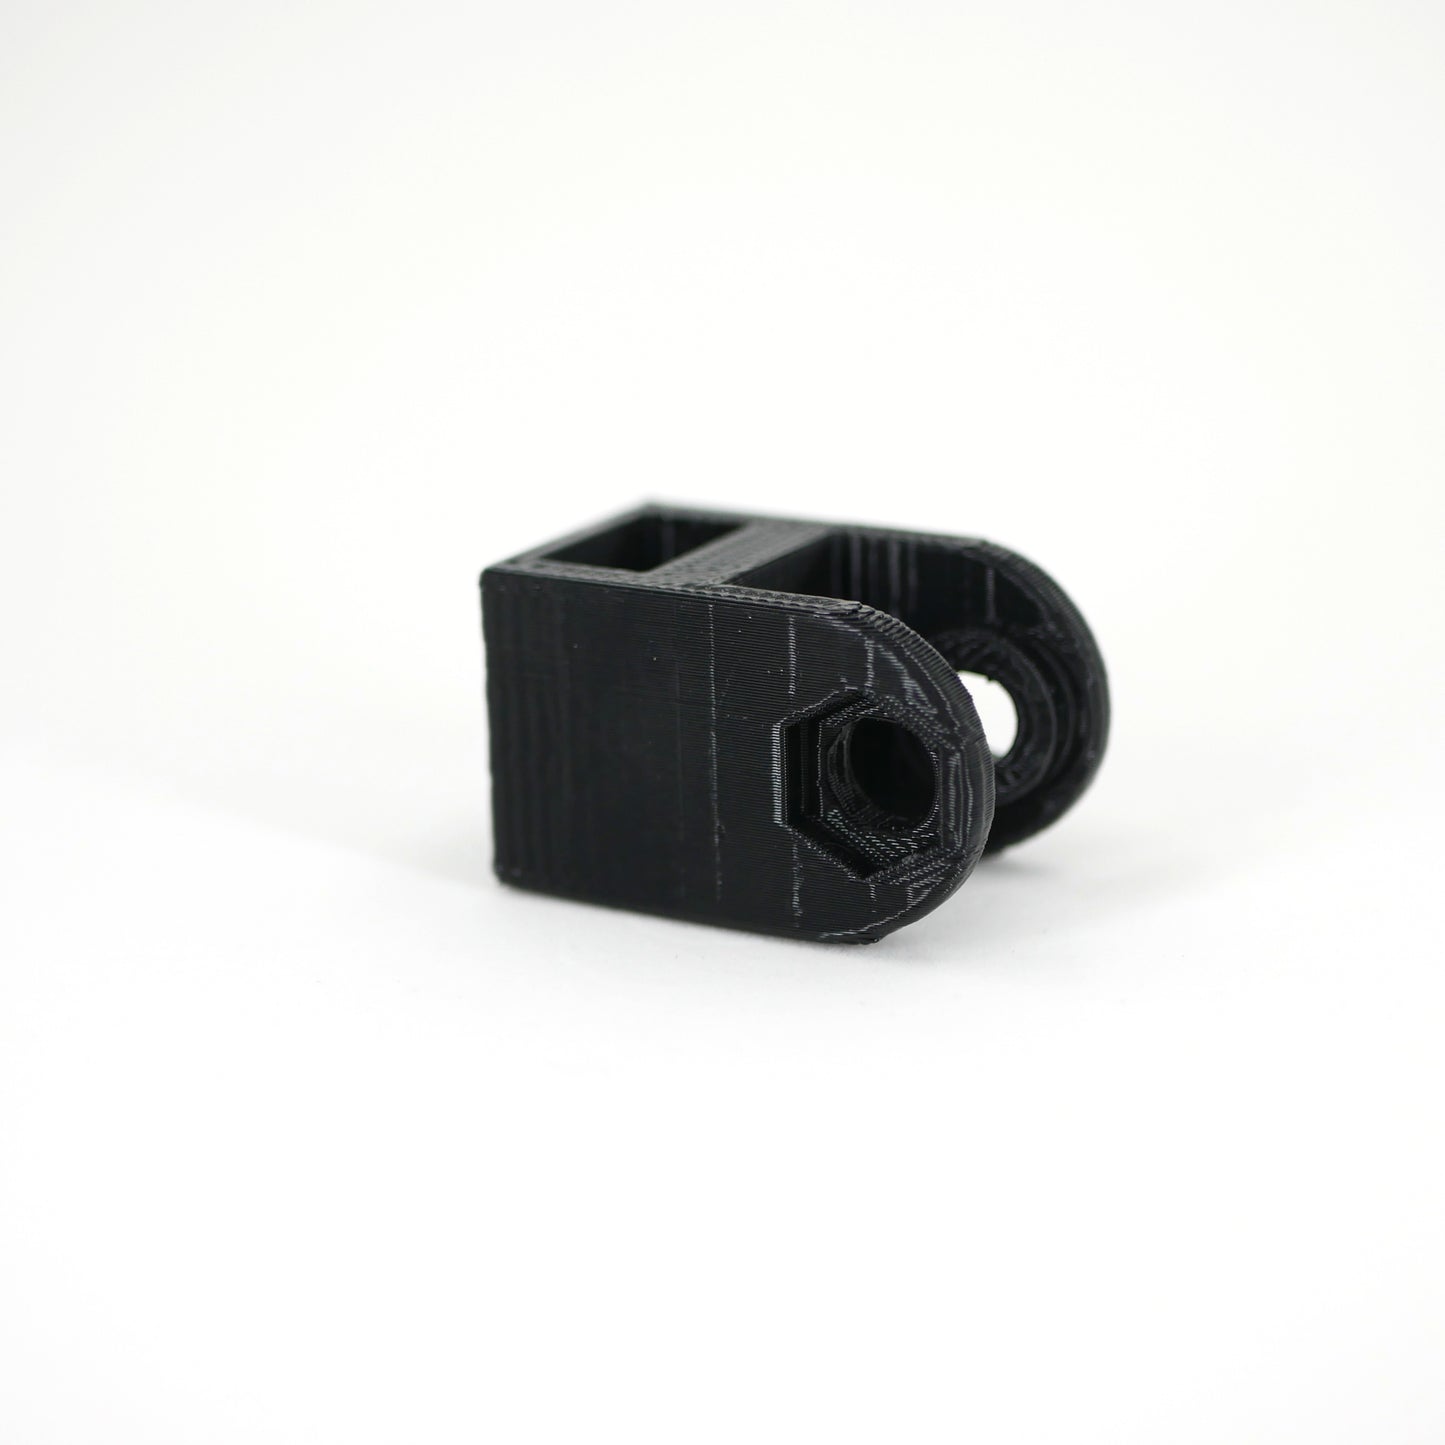 The left side of a black HyperX DuoCast microphone mount adapter.